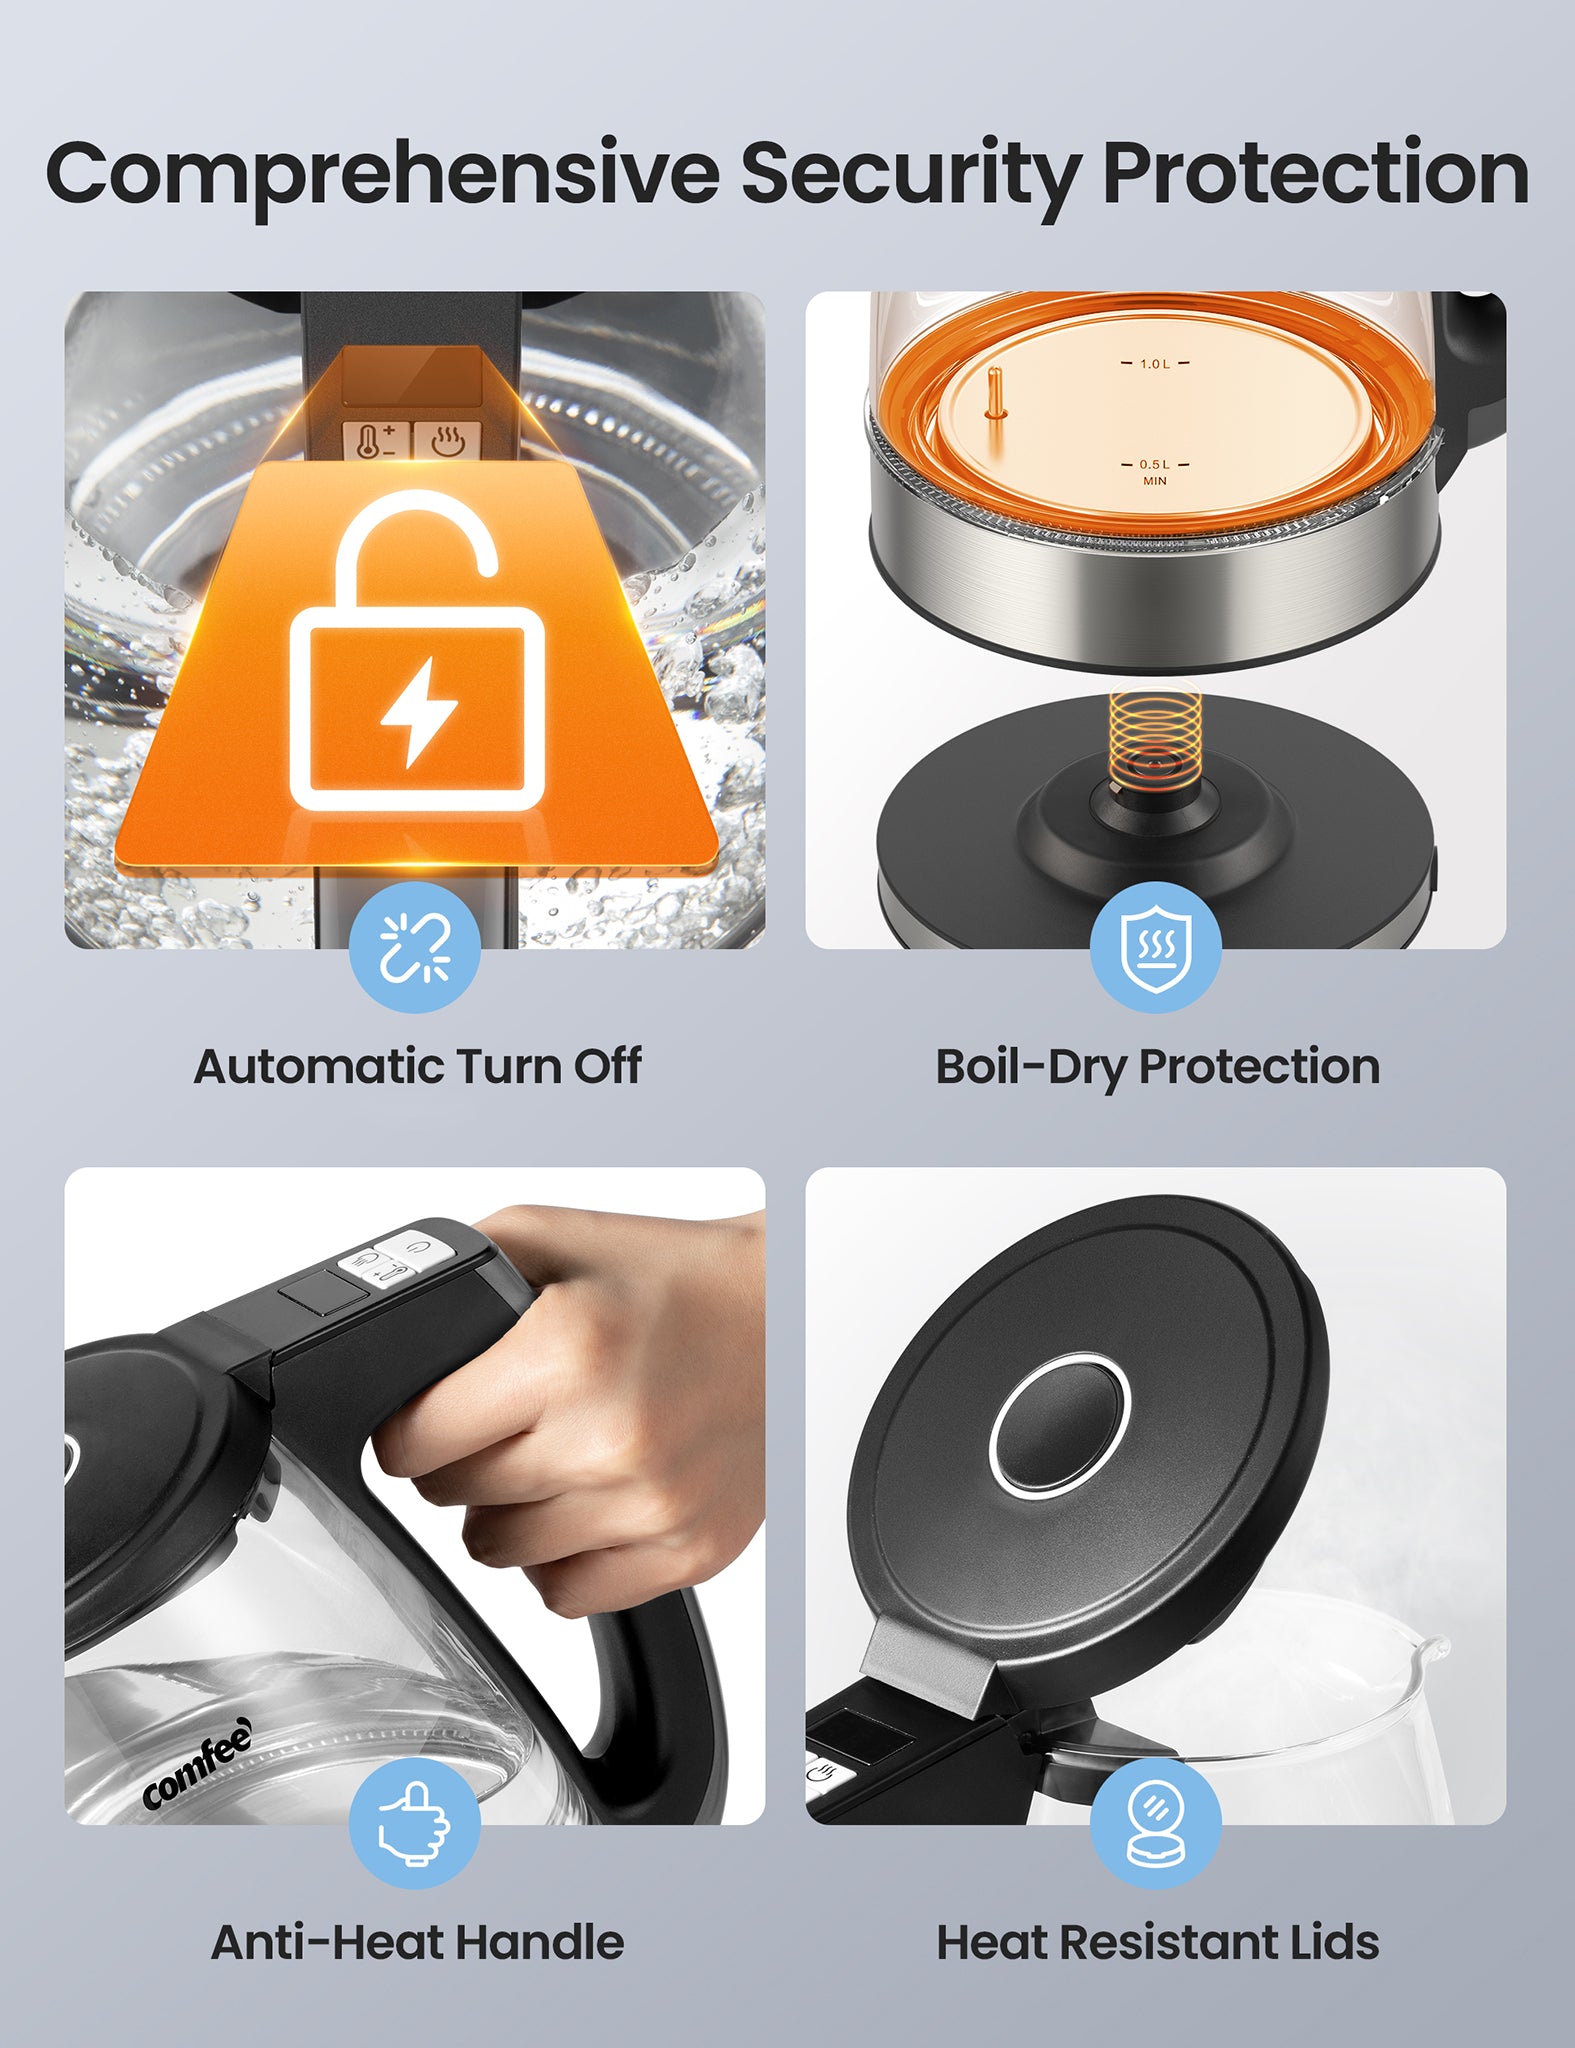 Safety features of Comfee kettle: automatic turn-off, boil-dry protection, and cool-touch handle